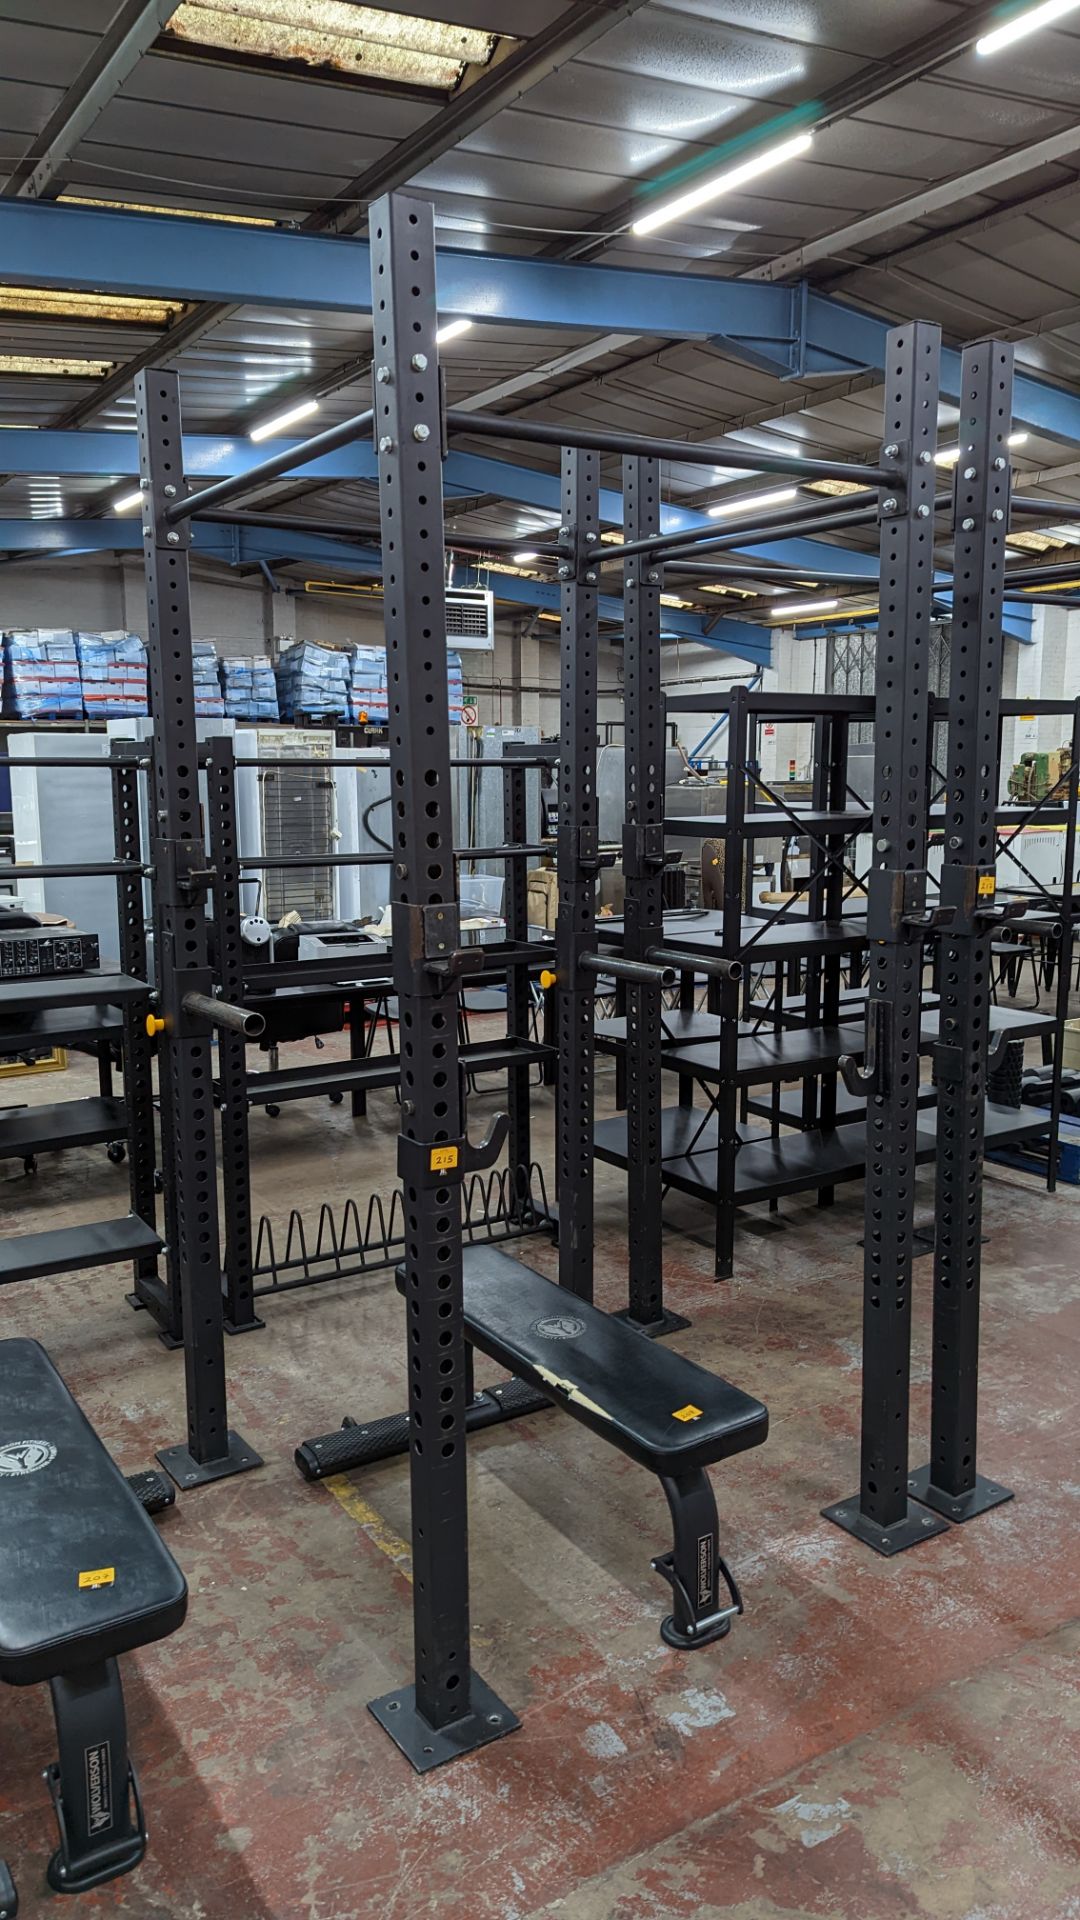 Power Rack comprising four vertical supports (each approximately 250 cms tall), four horizontal rods